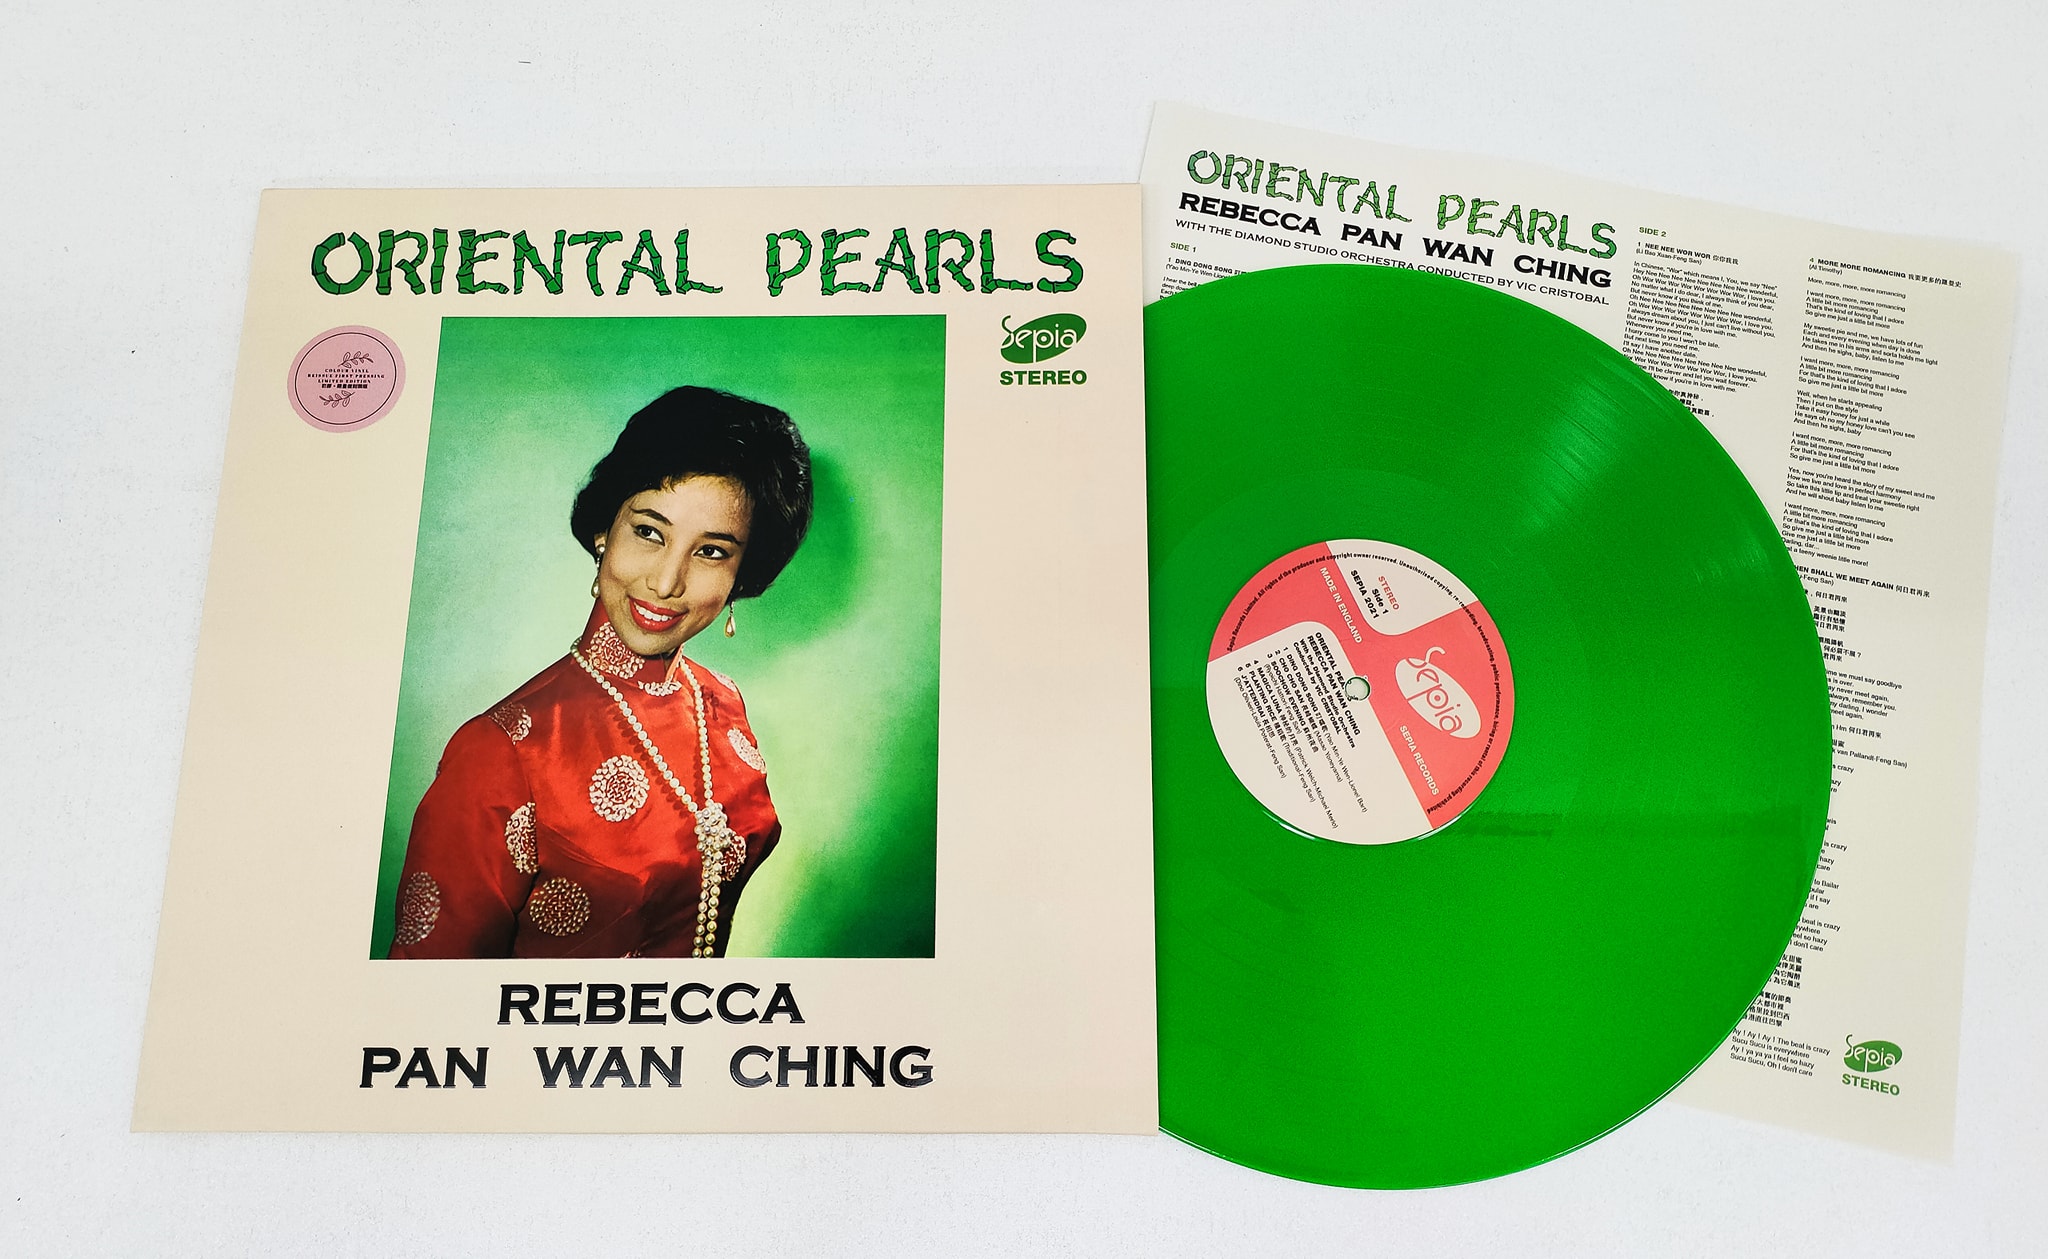 Rebecca Pan Wan Ching 潘迪華 - Oriental Pearls (Limited Edition Coloured LP )